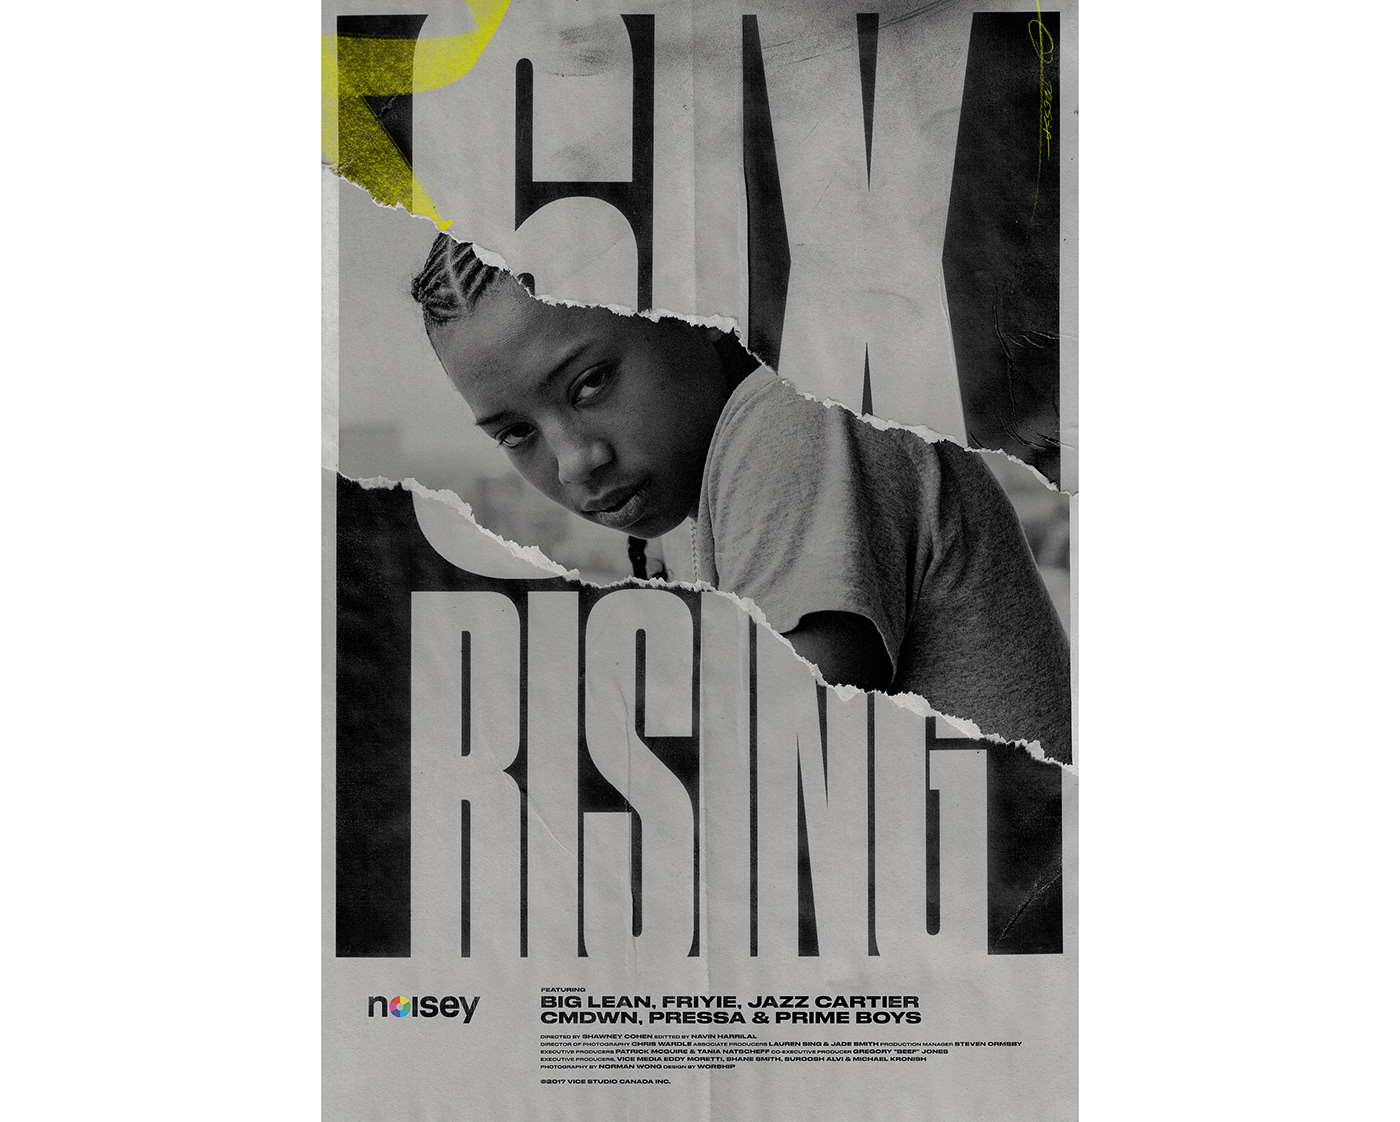 6ix rising 6ix Toronto Rappers film titles title sequence art direction  worship posters VICE